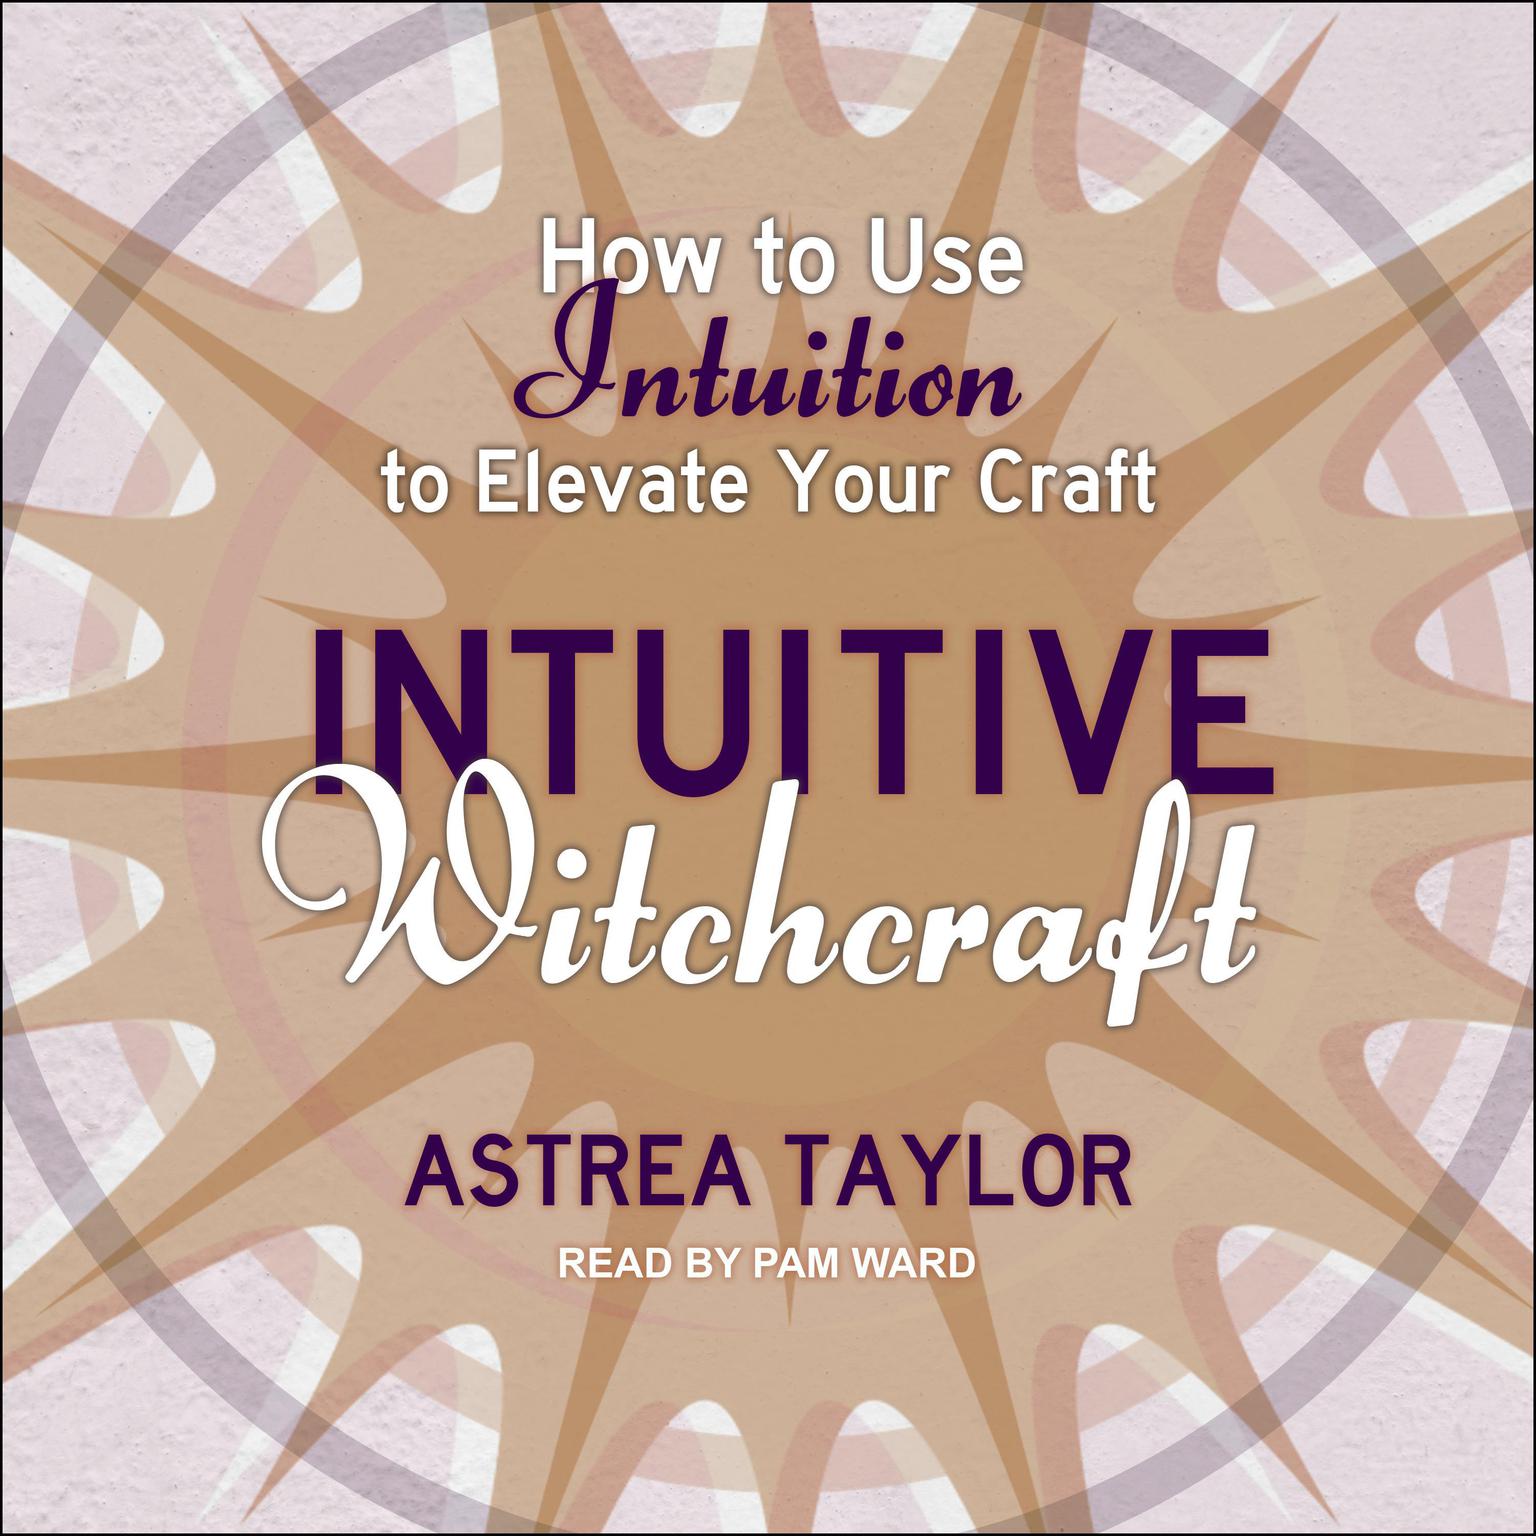 Intuitive Witchcraft: How to Use Intuition to Elevate Your Craft Audiobook, by Astrea Taylor